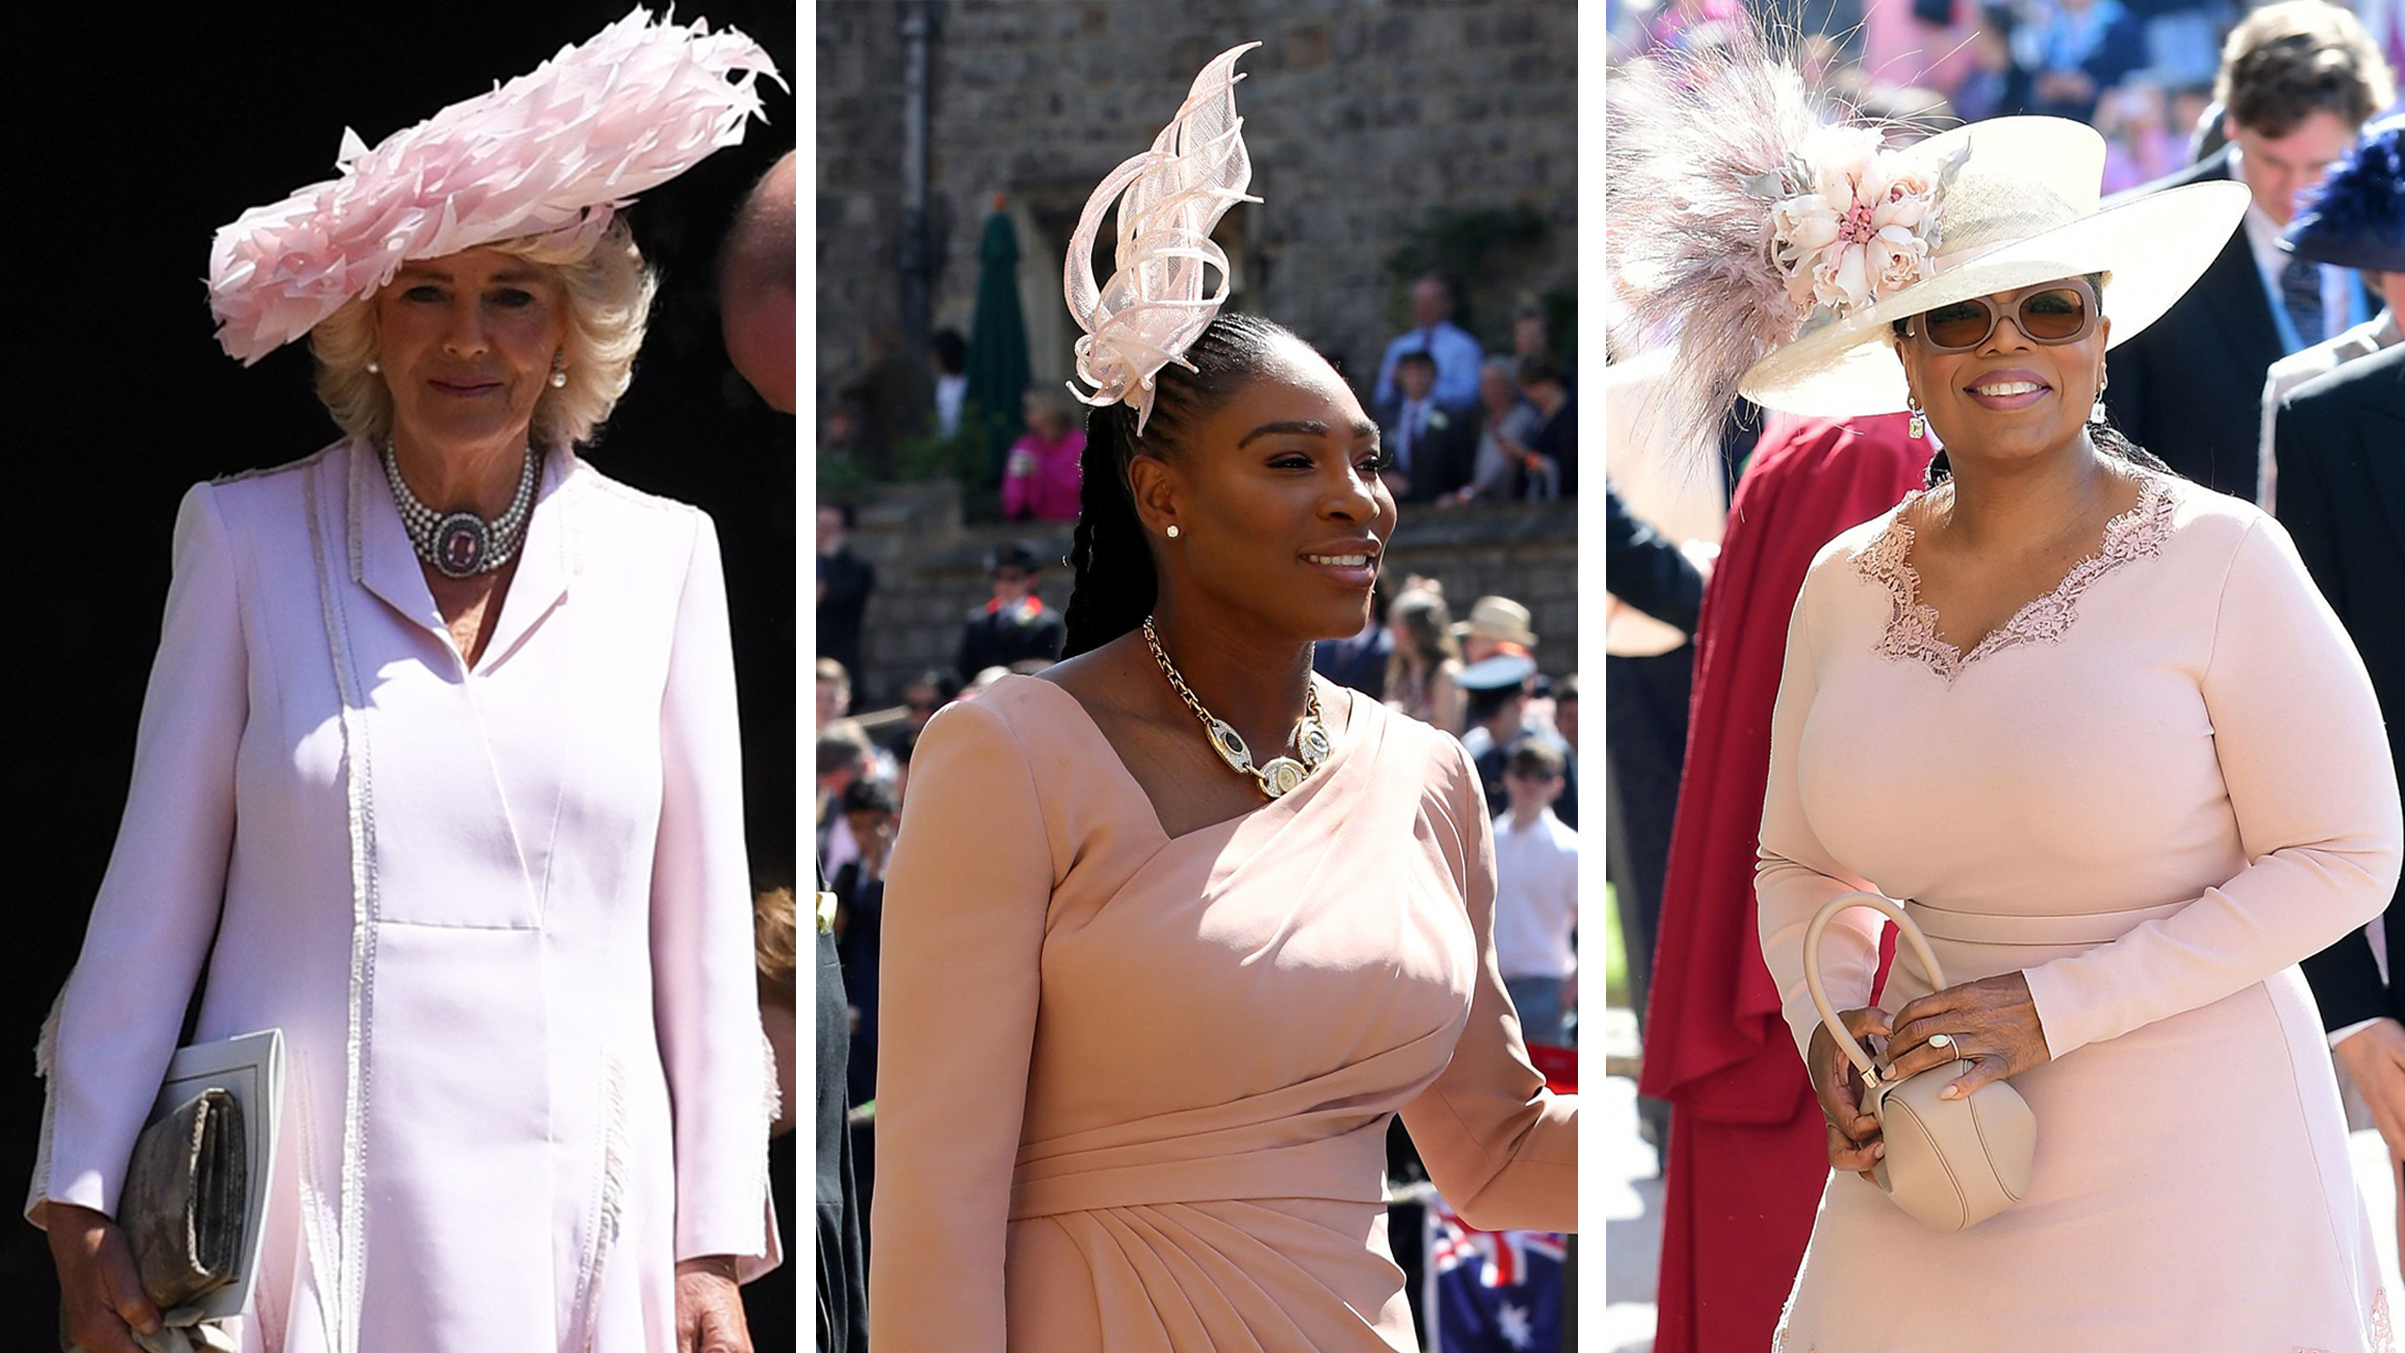 Why British People Wear Hats to the Royal Wedding